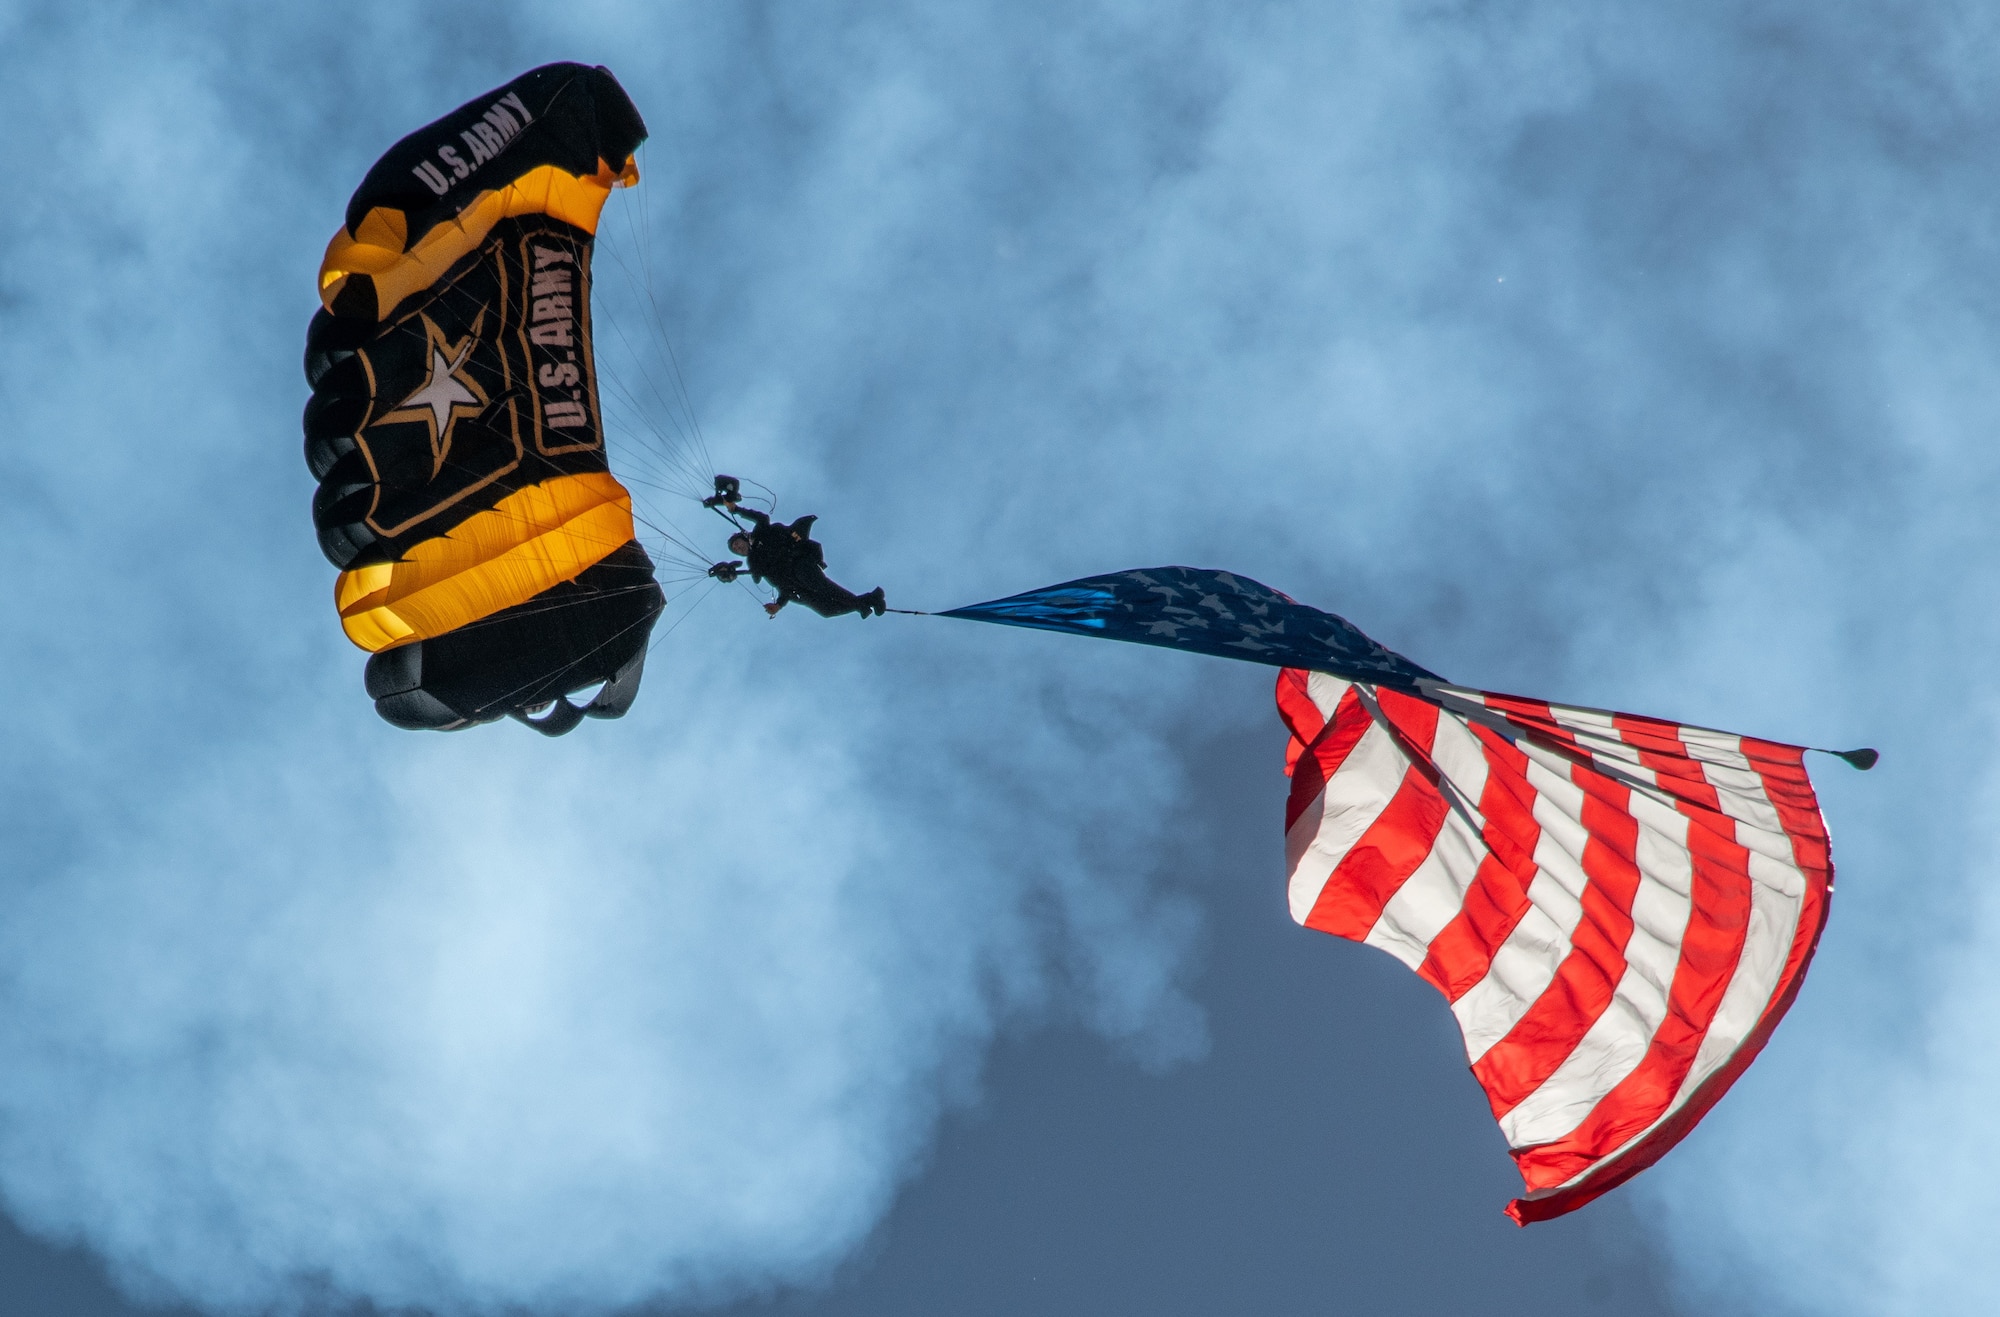 A ground's eye view of a Golden Knight parachuting to the ground. Above him is a black and gold parachute canopy and attached to him is a large American flag.